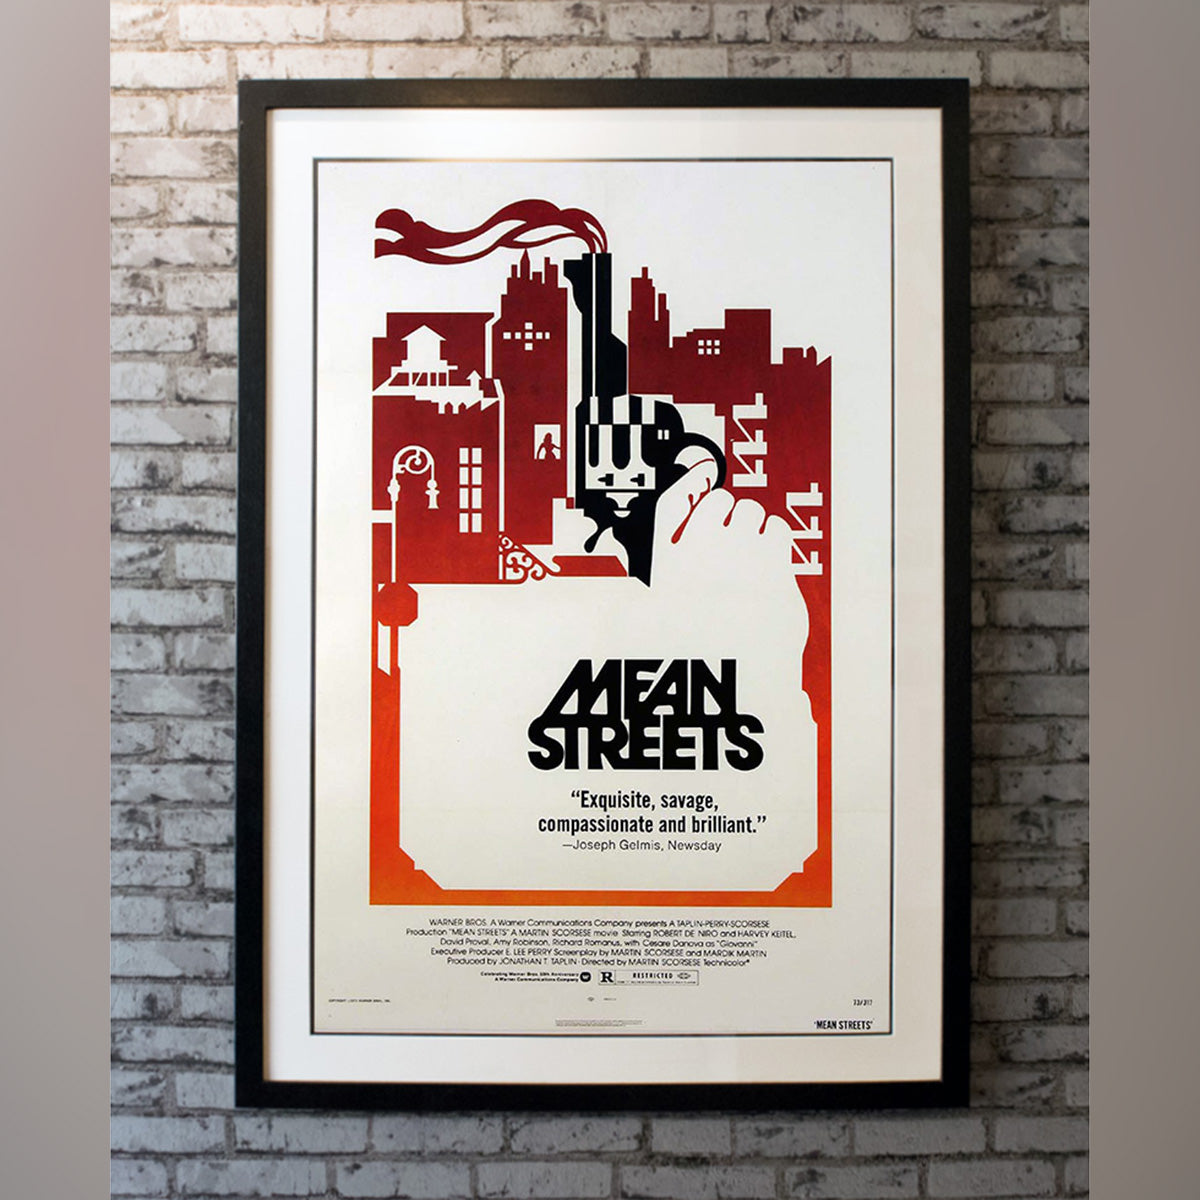 Original Movie Poster of Mean Streets (1973)